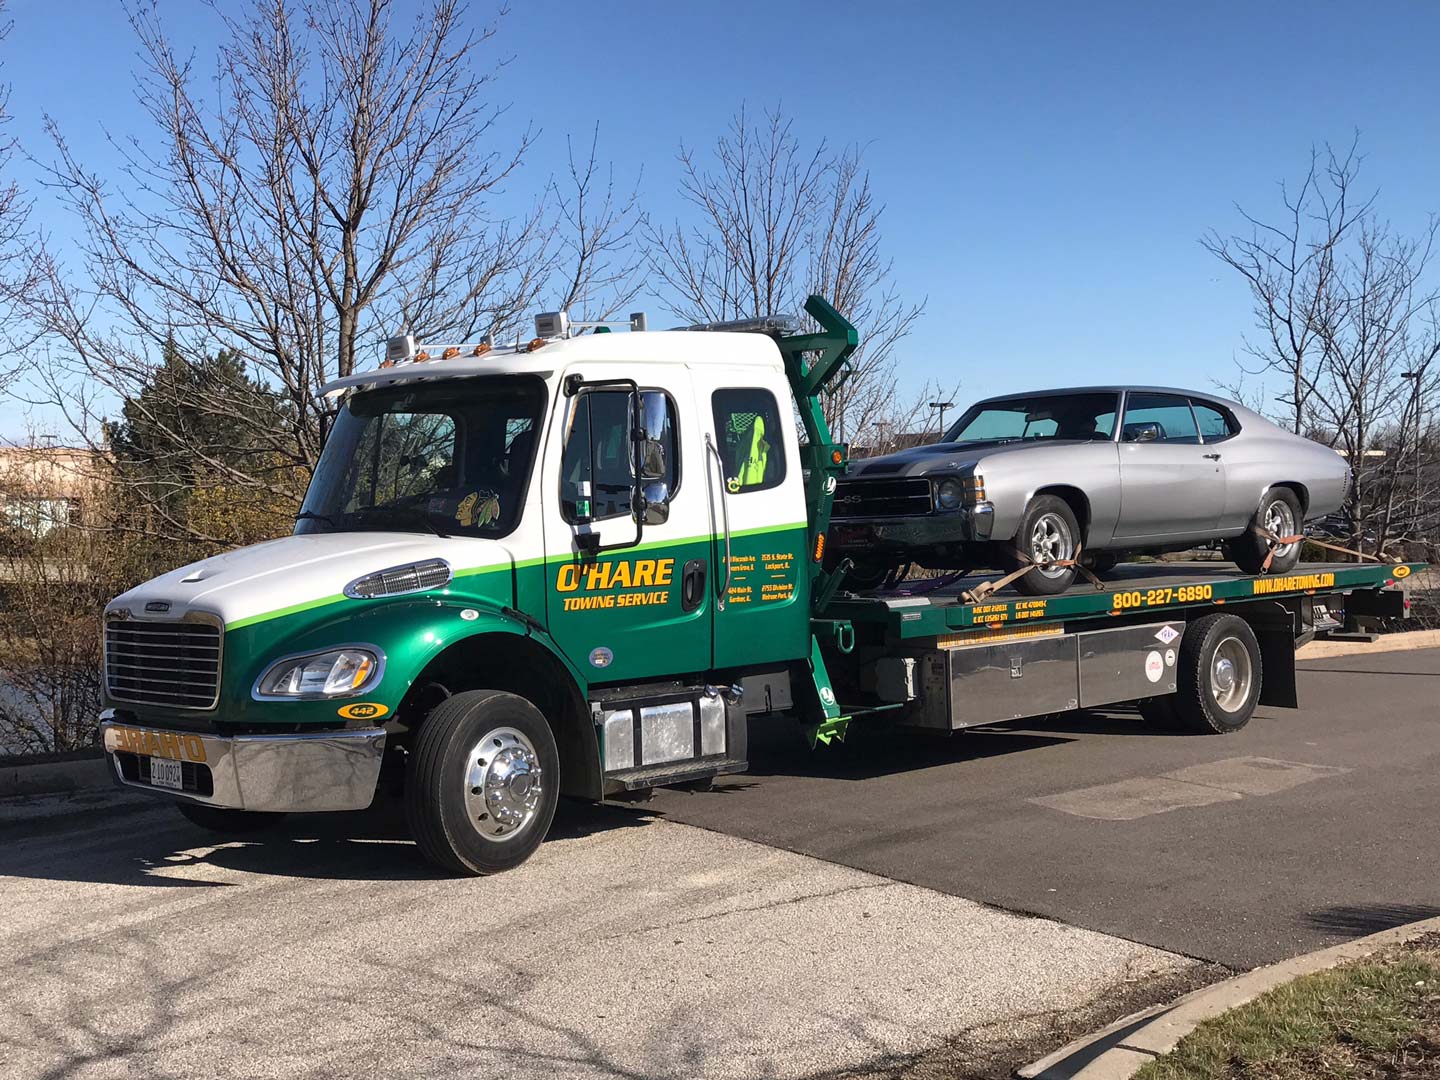 O'Hare Towing Service. providing premier towing services for over 50 y...